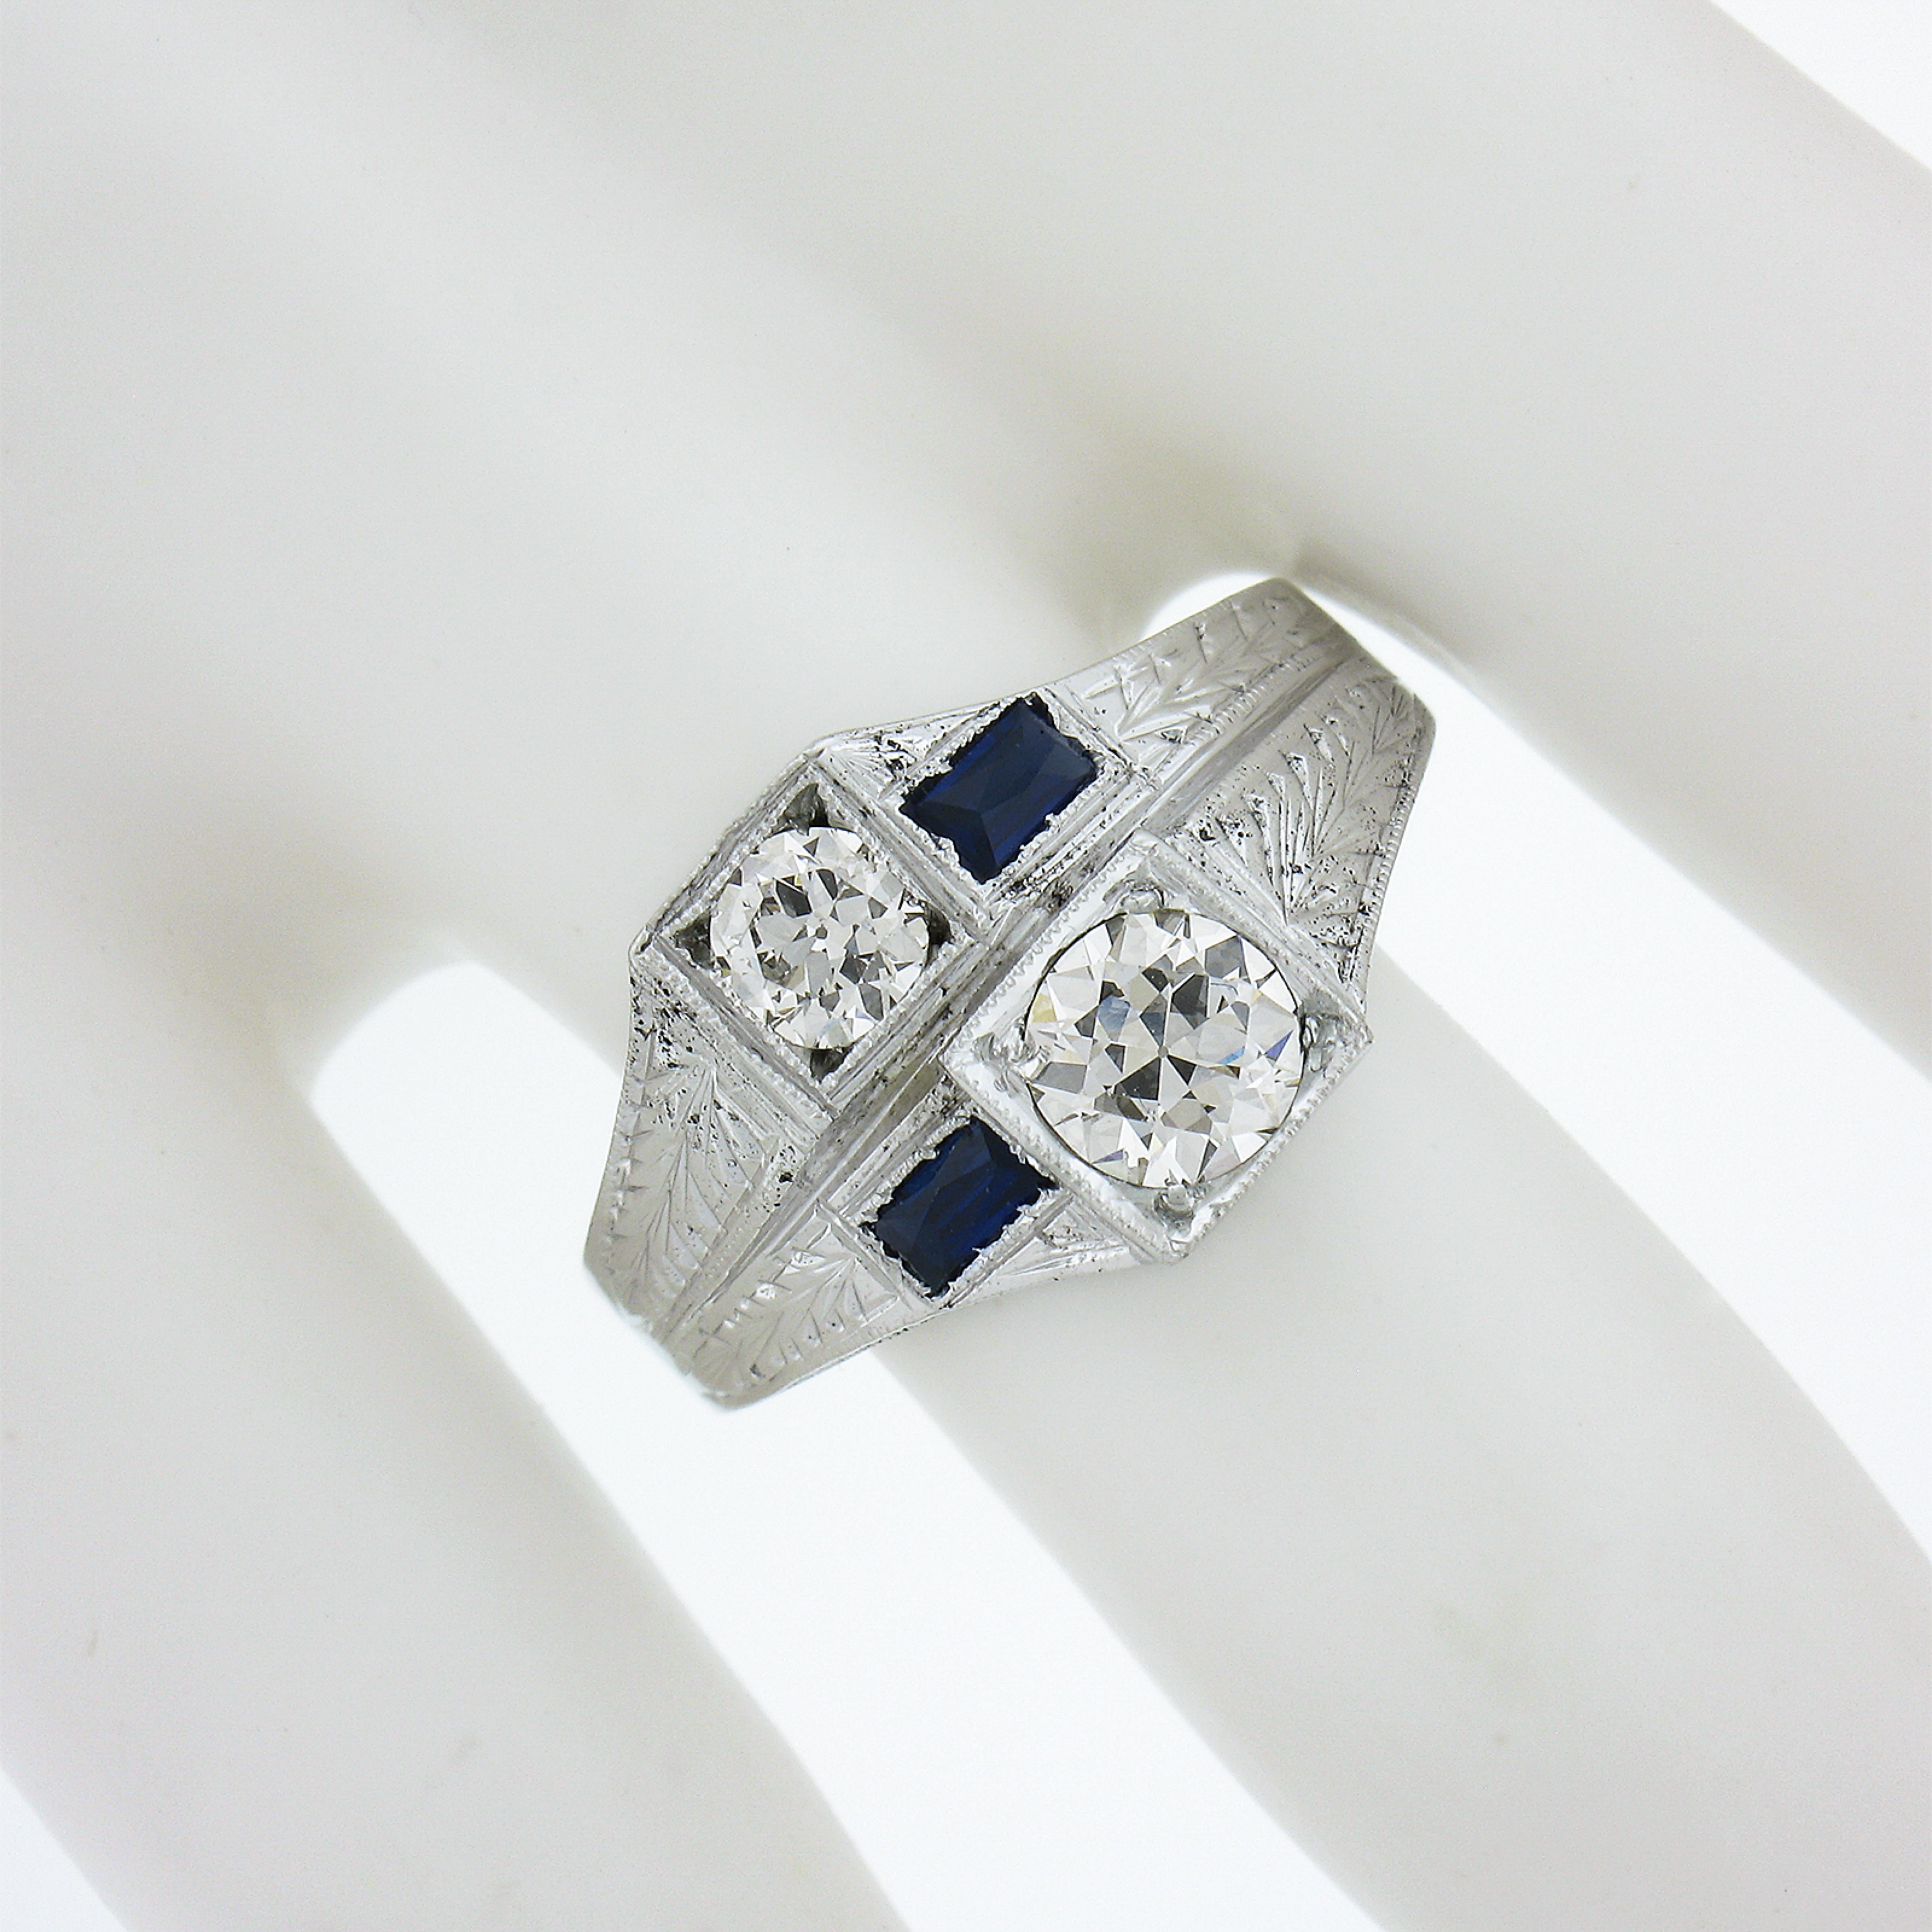 Antique Art Deco White Gold GIA Dual Diamond & Sapphire Moi et Toi Engraved Ring In Good Condition For Sale In Montclair, NJ